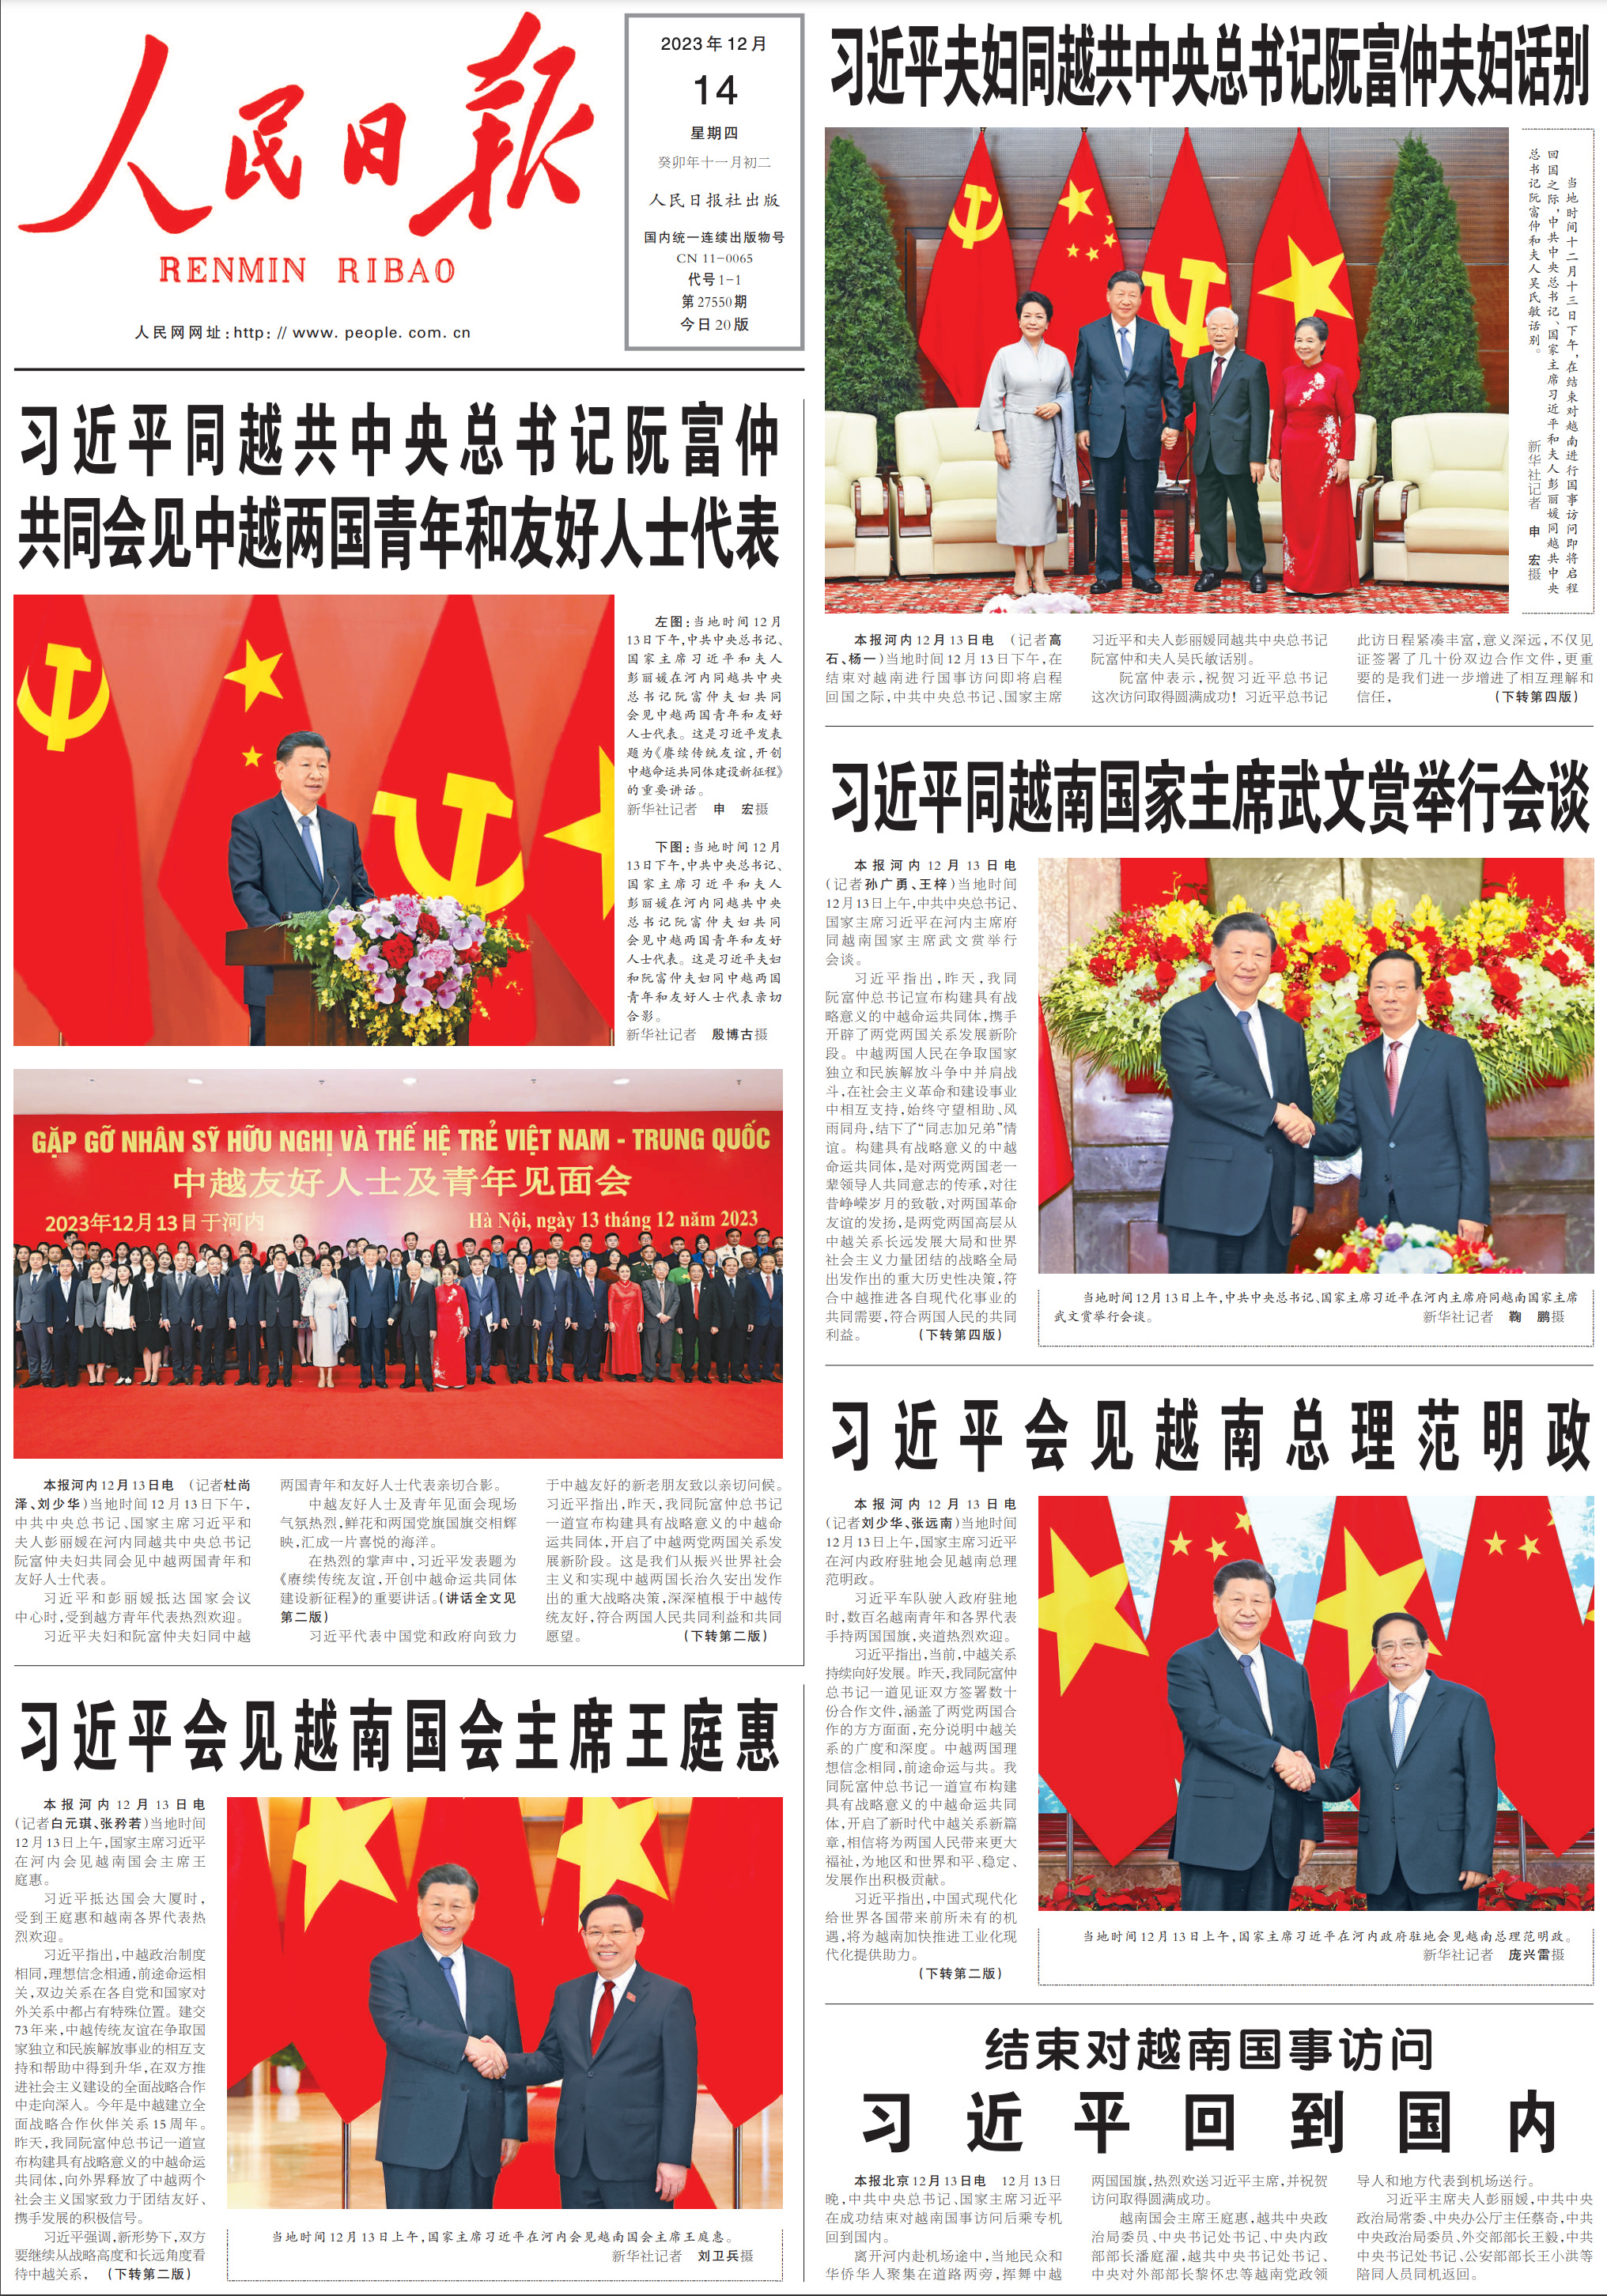 Xi leaves Vietnam; More on the CEWC; Real Estate; Court judgements